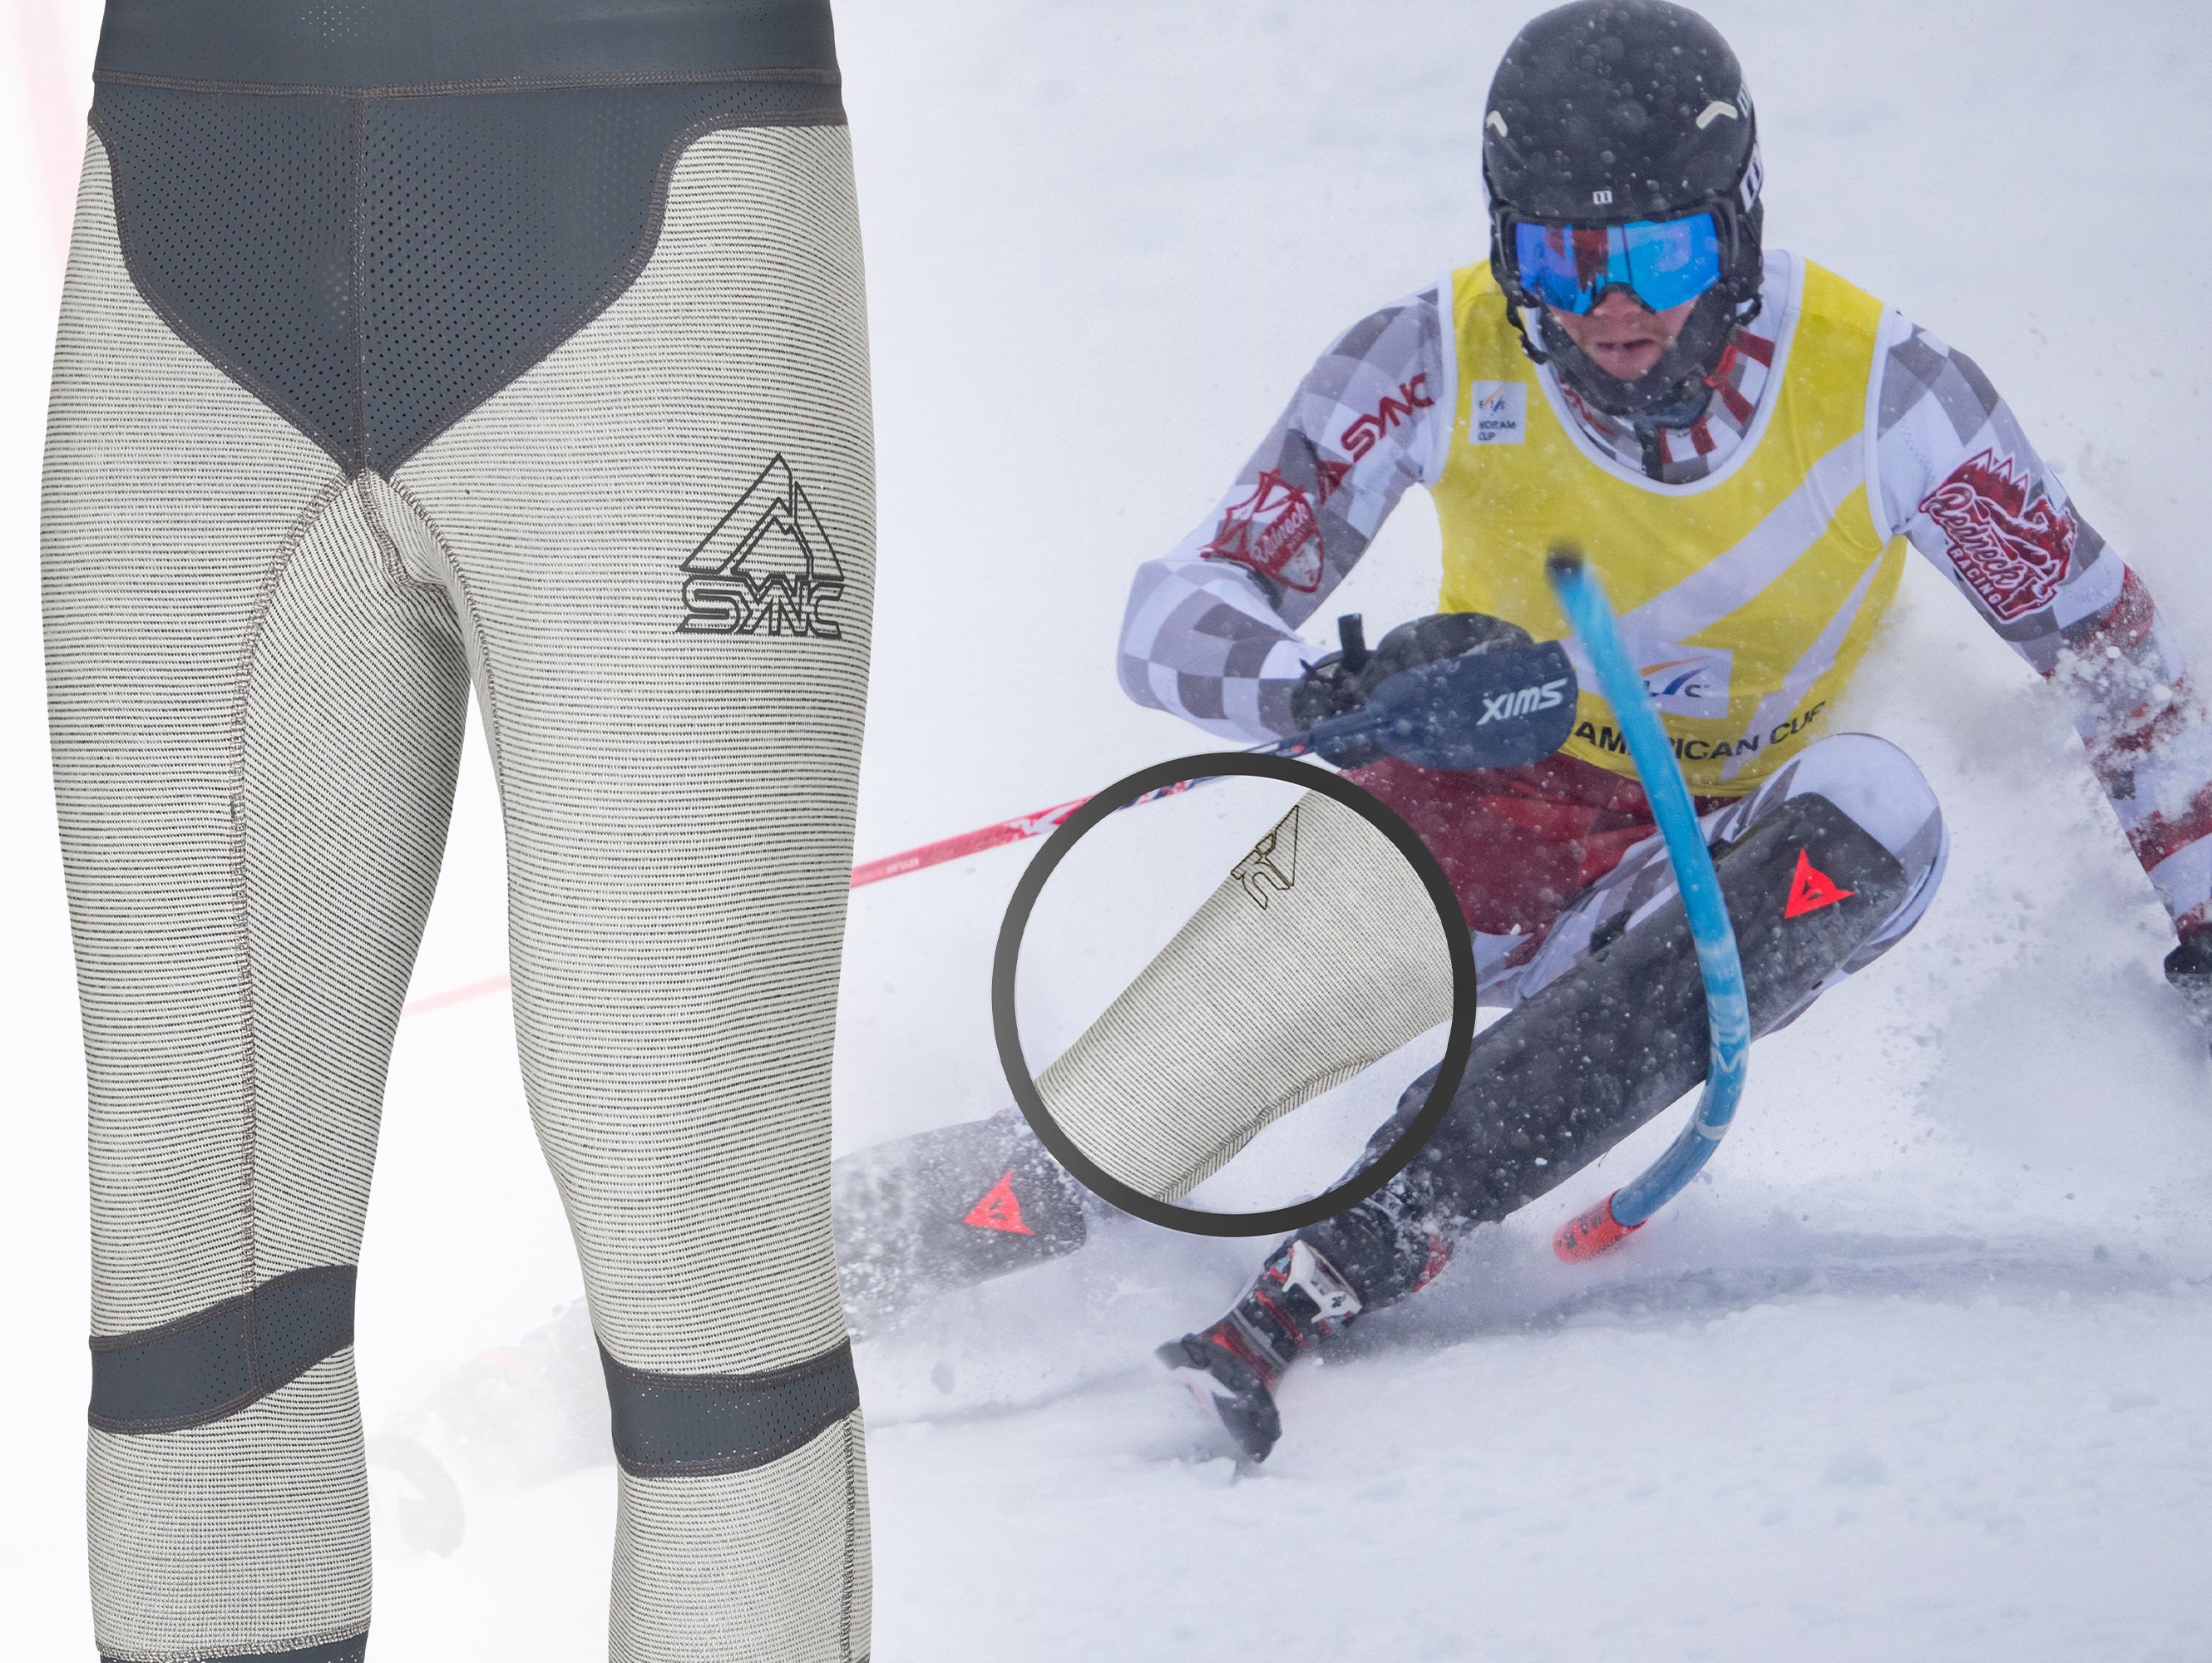 SYNC Performance Launches Cut Resistant Base Layer and Cut Resistant Calf Sleeve